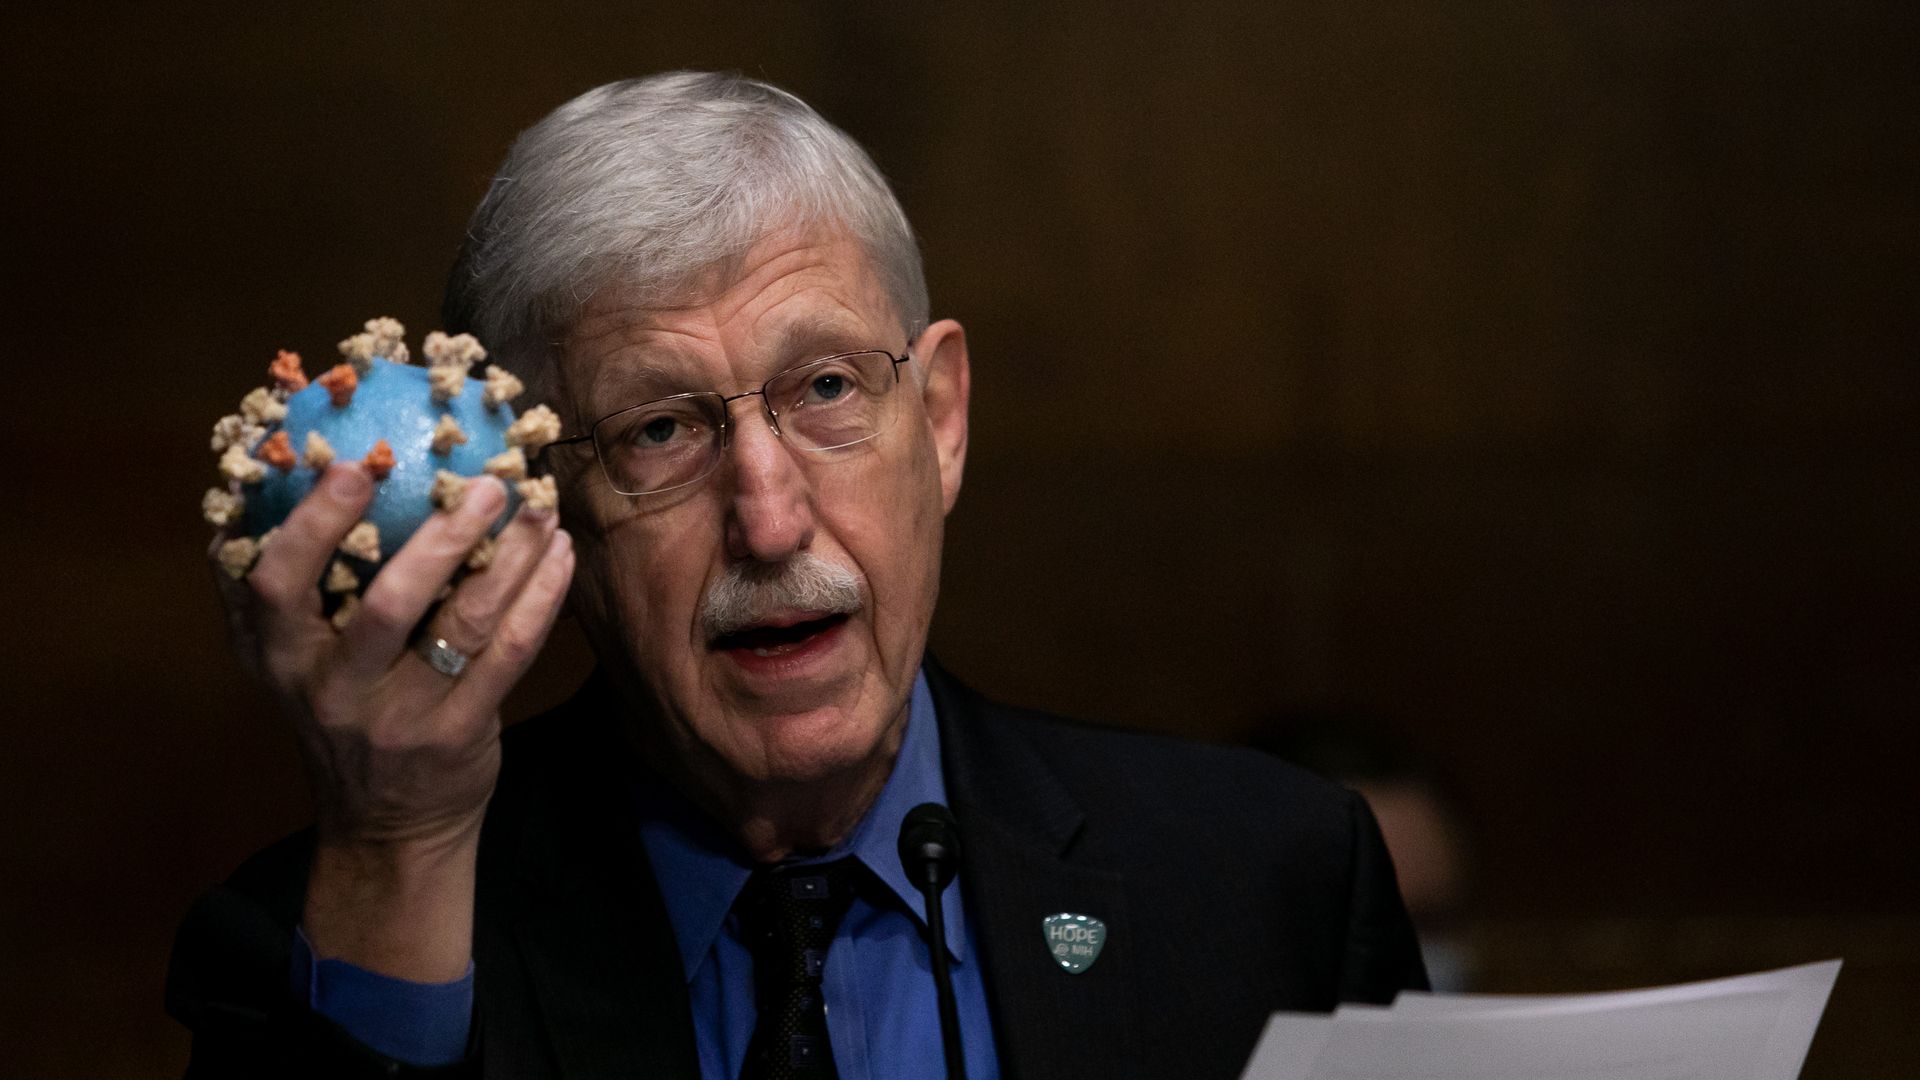 National Health Institute Director Francis S. Collins holds a model of a Coronavirus, as he testifies at a Senate hearing on July 2, 2020 in Washington, DC. 